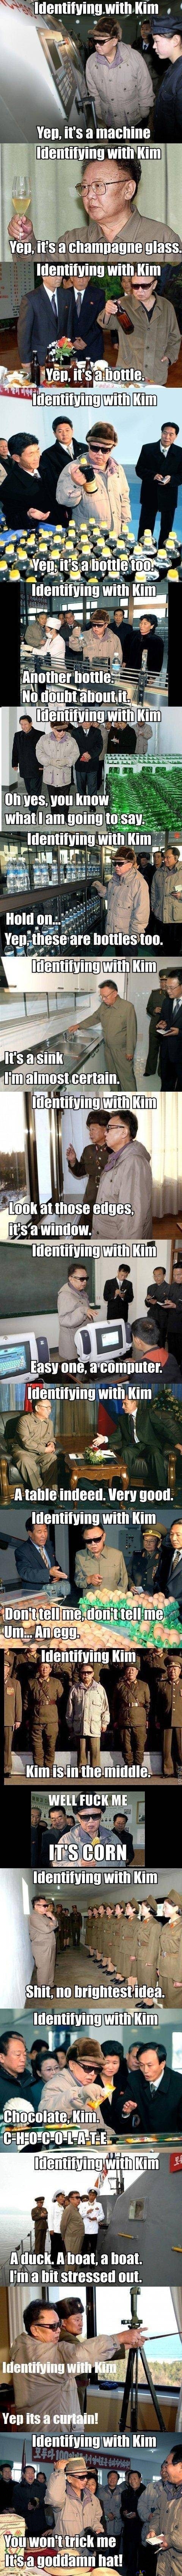 Identifying with Kim Jong Il